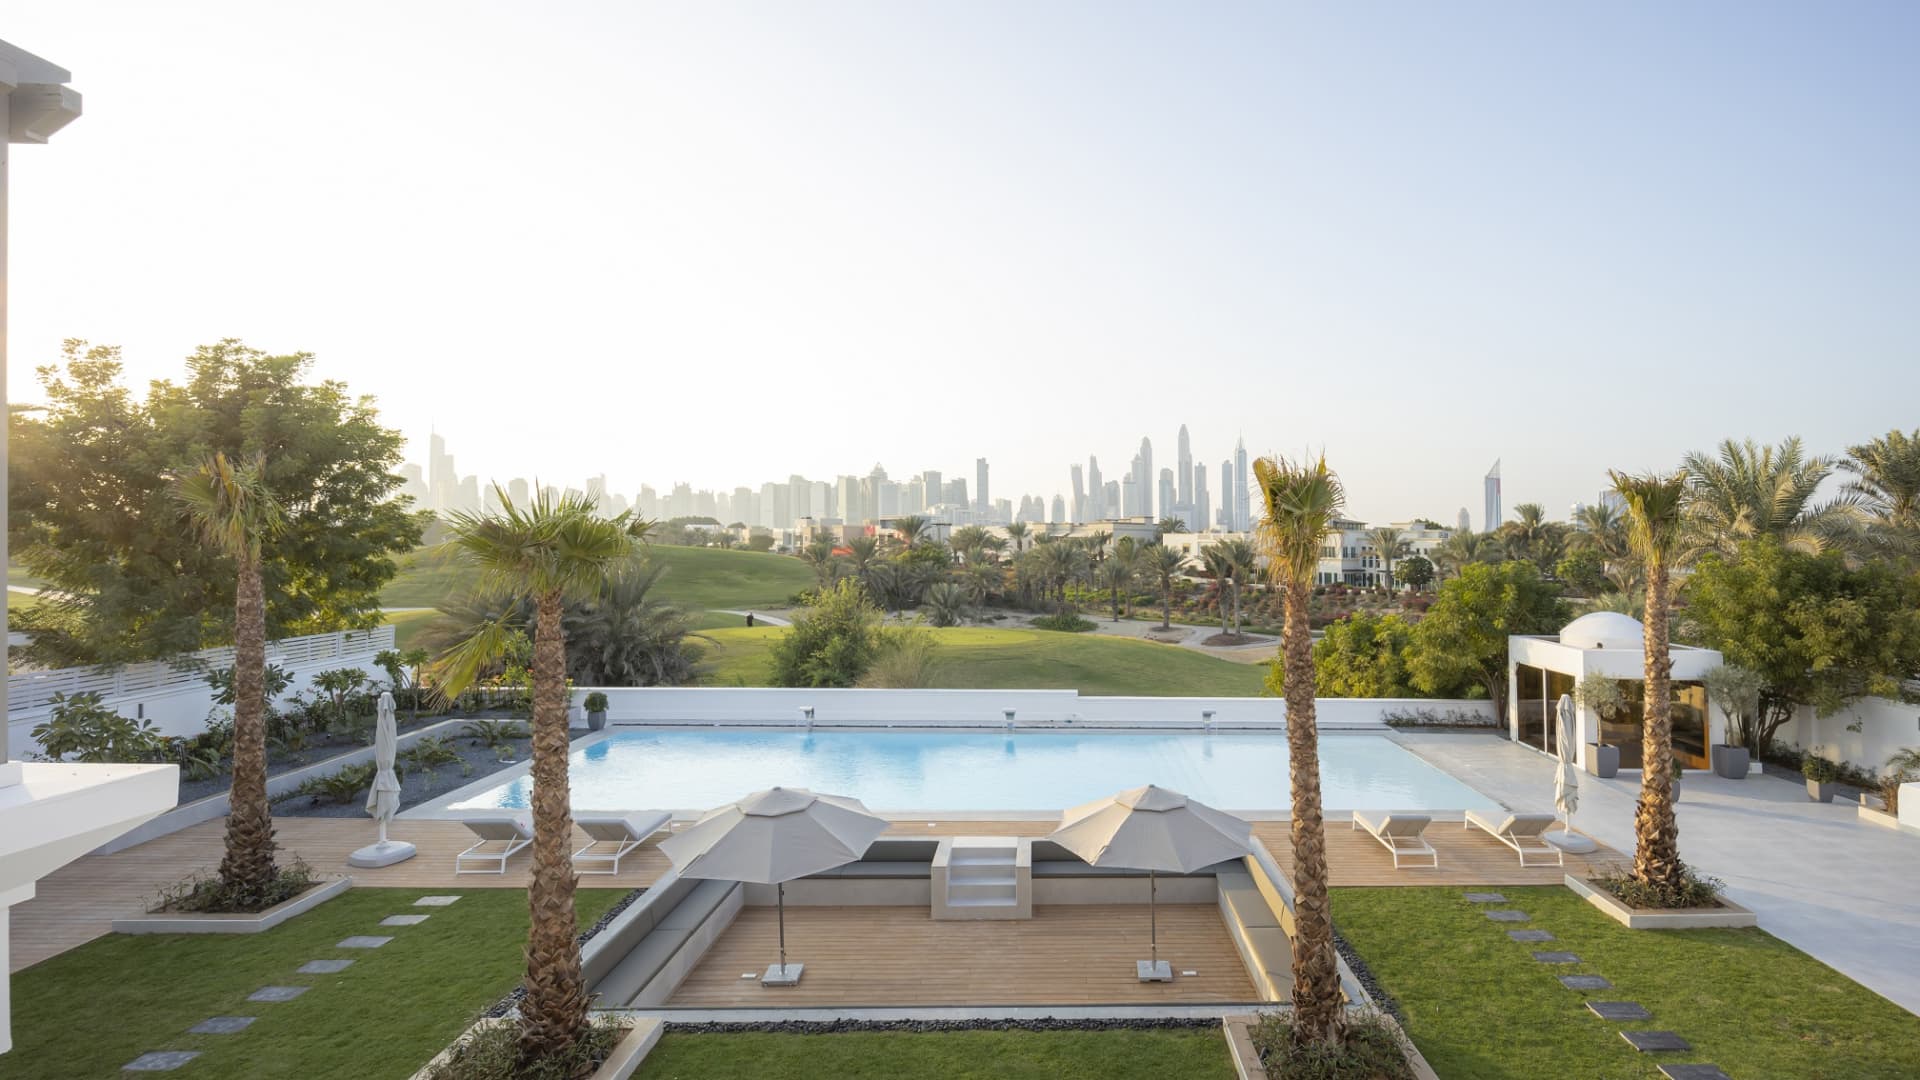 Swanky vacation rentals across the Middle East look to capitalize on ‘revenge tourism’ trend